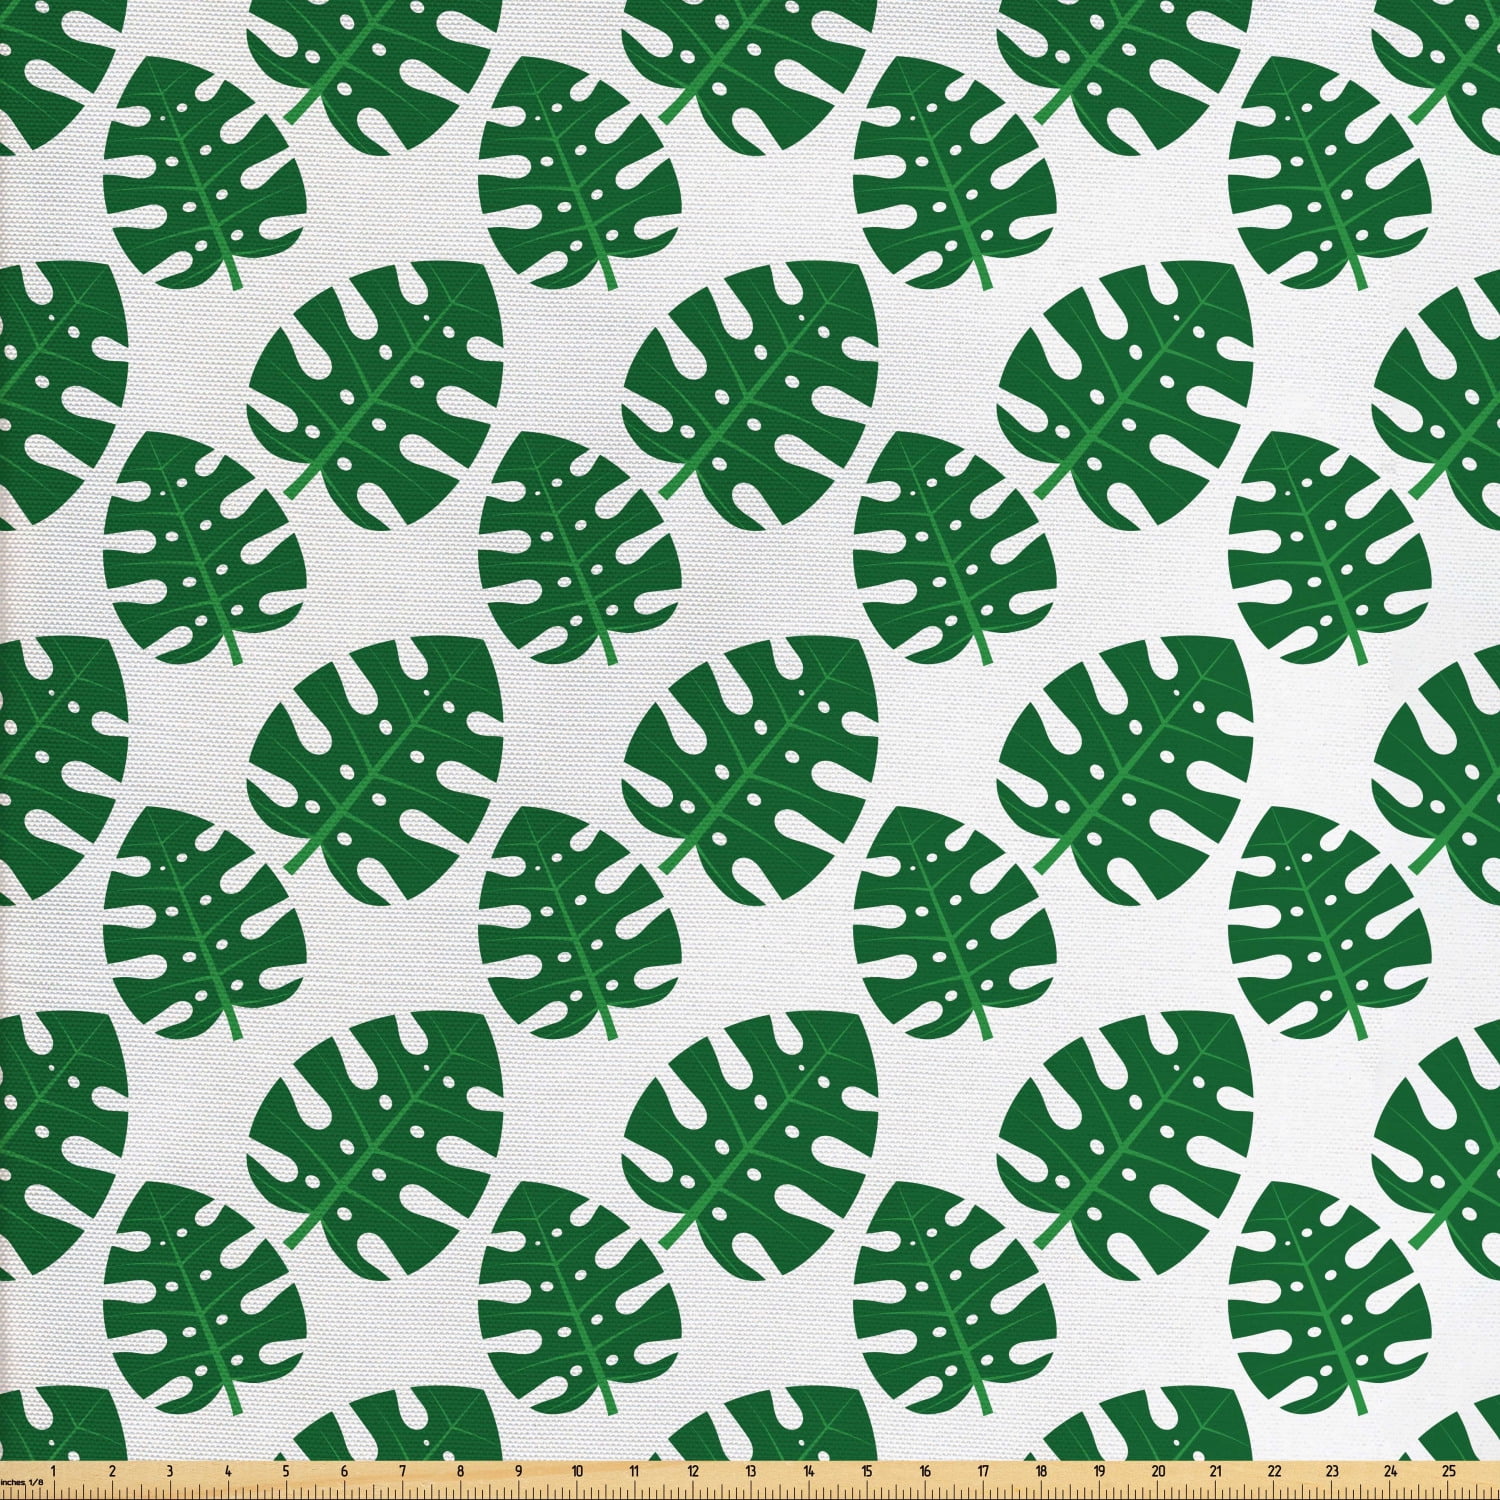 Philodendron Fabric by the Yard, Continuous Pattern of Cartoon Style Jungle  Leaves Simple Nature Ornament, Upholstery Fabric for Dining Chairs Home  Decor Accents, Green and White by Ambesonne 